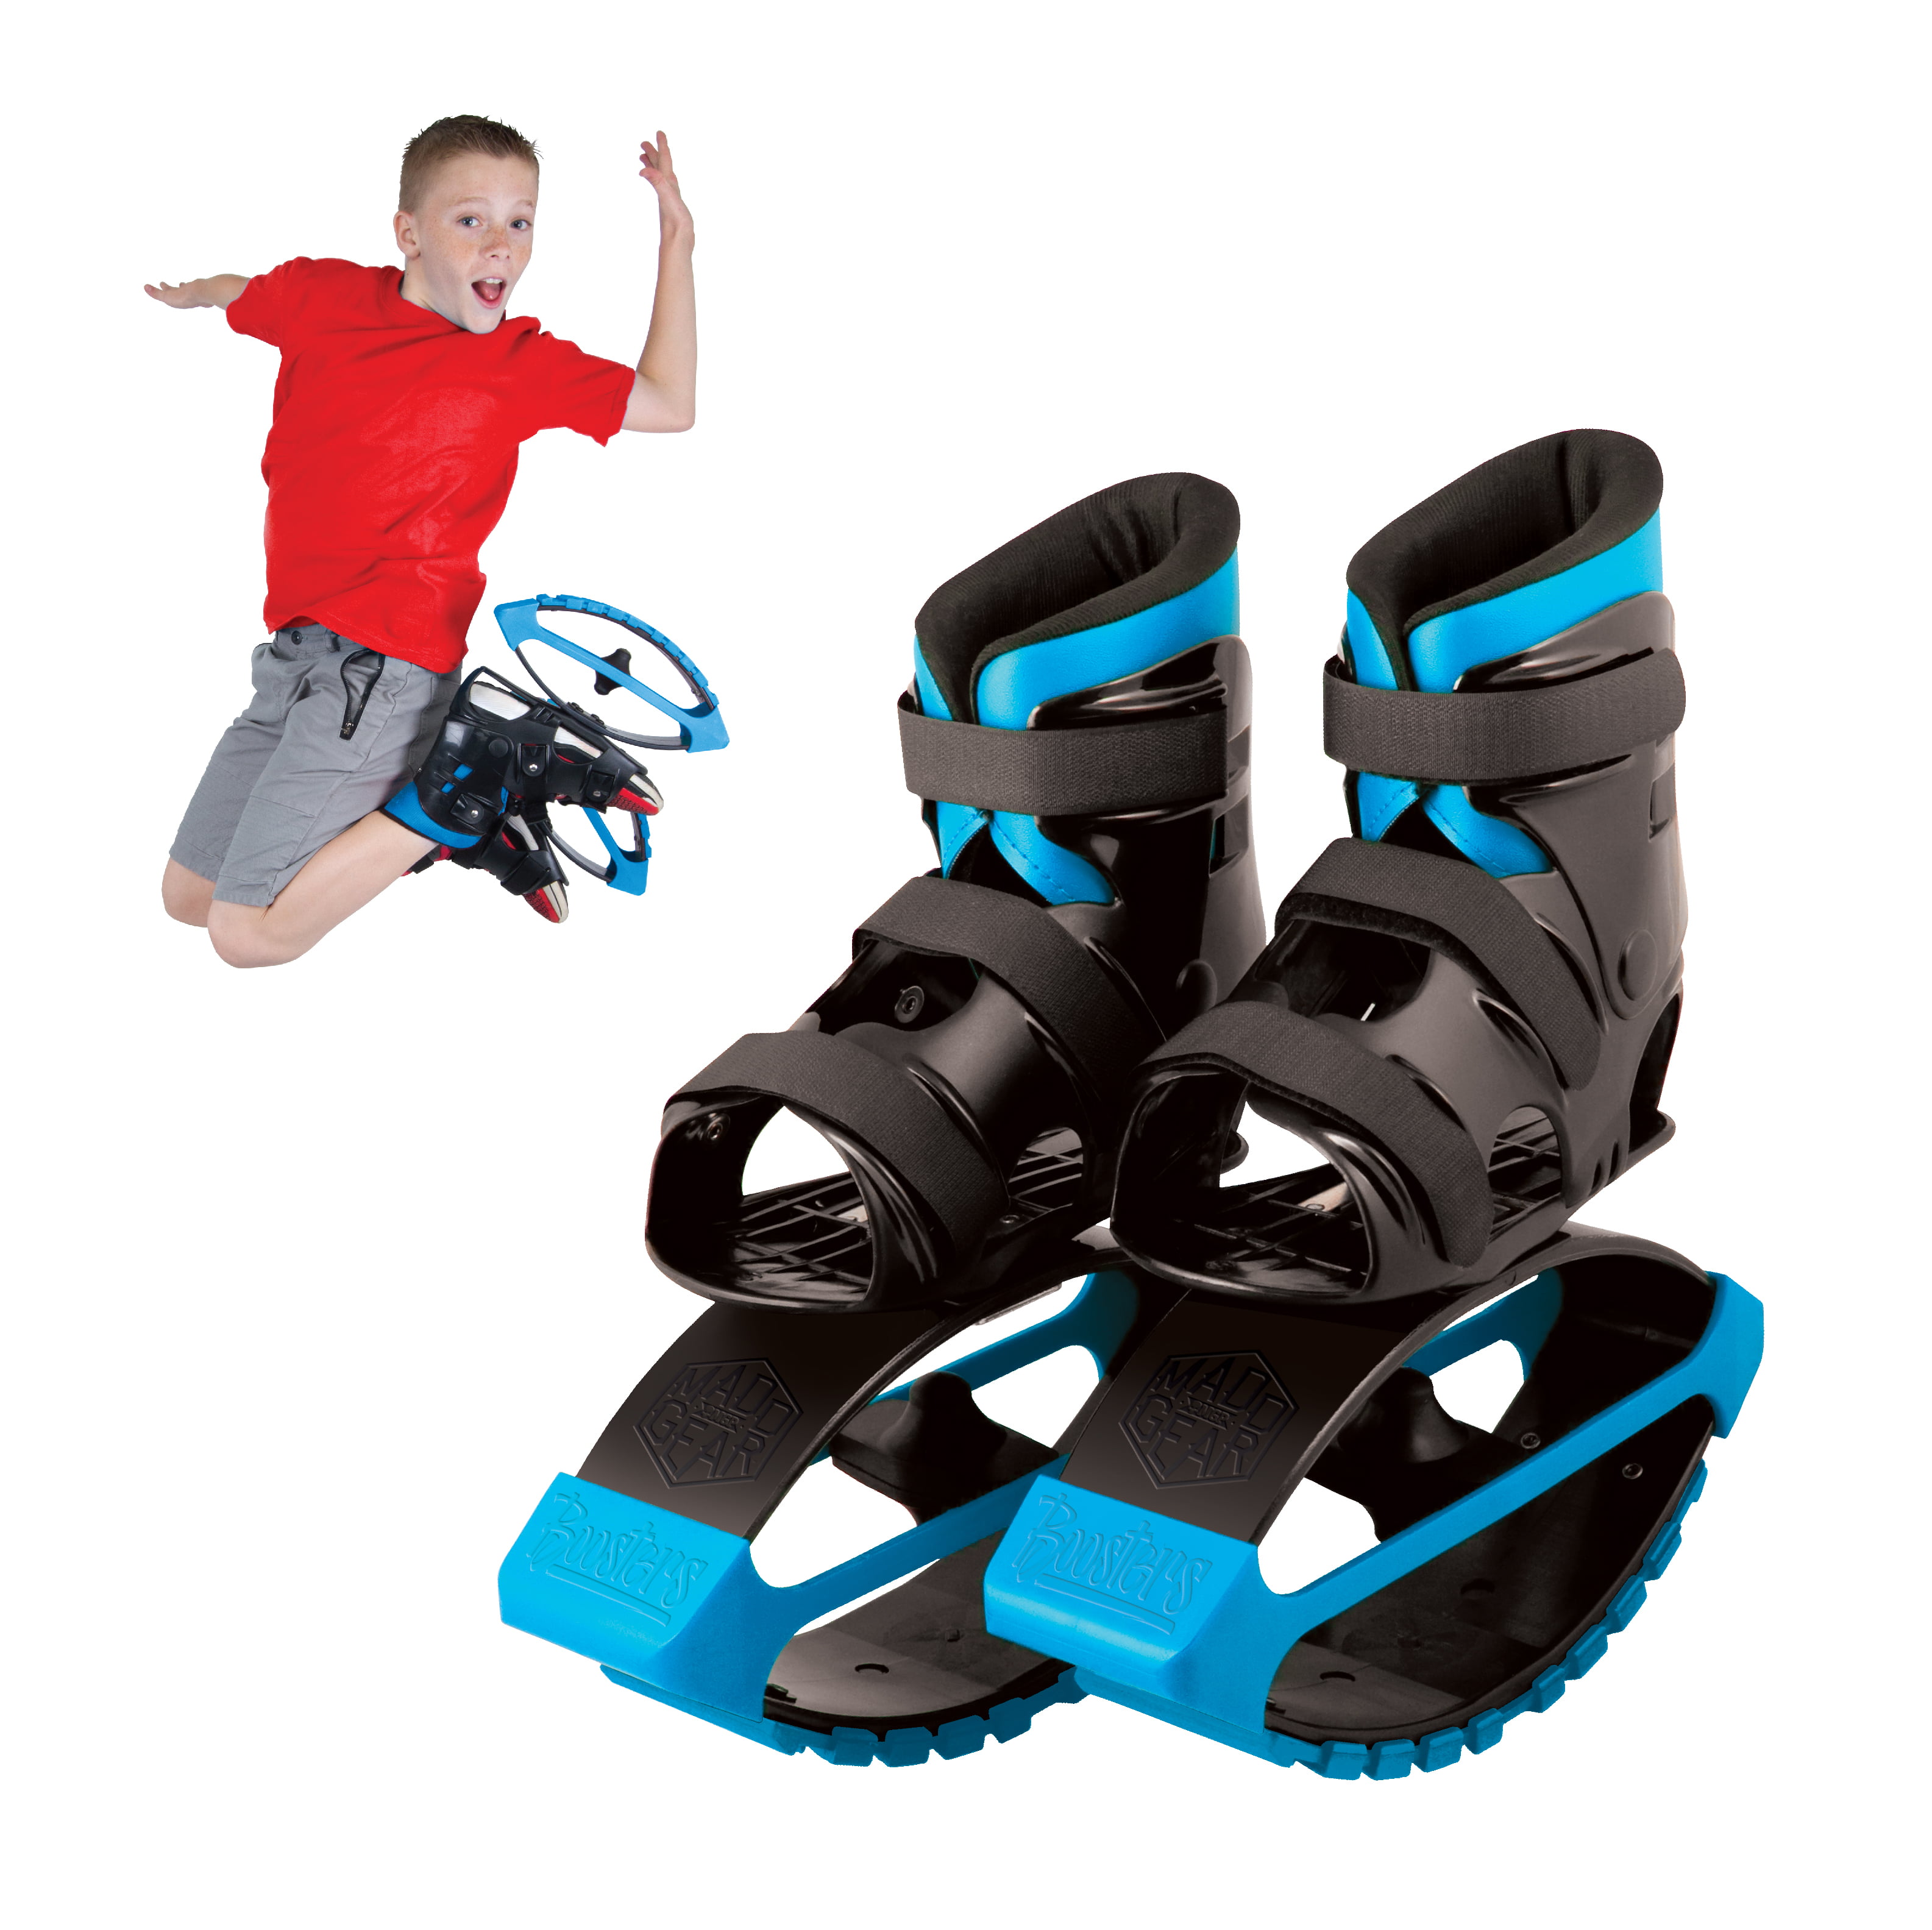 Big Time Toys 71364 Bouncy Shoes for sale online 